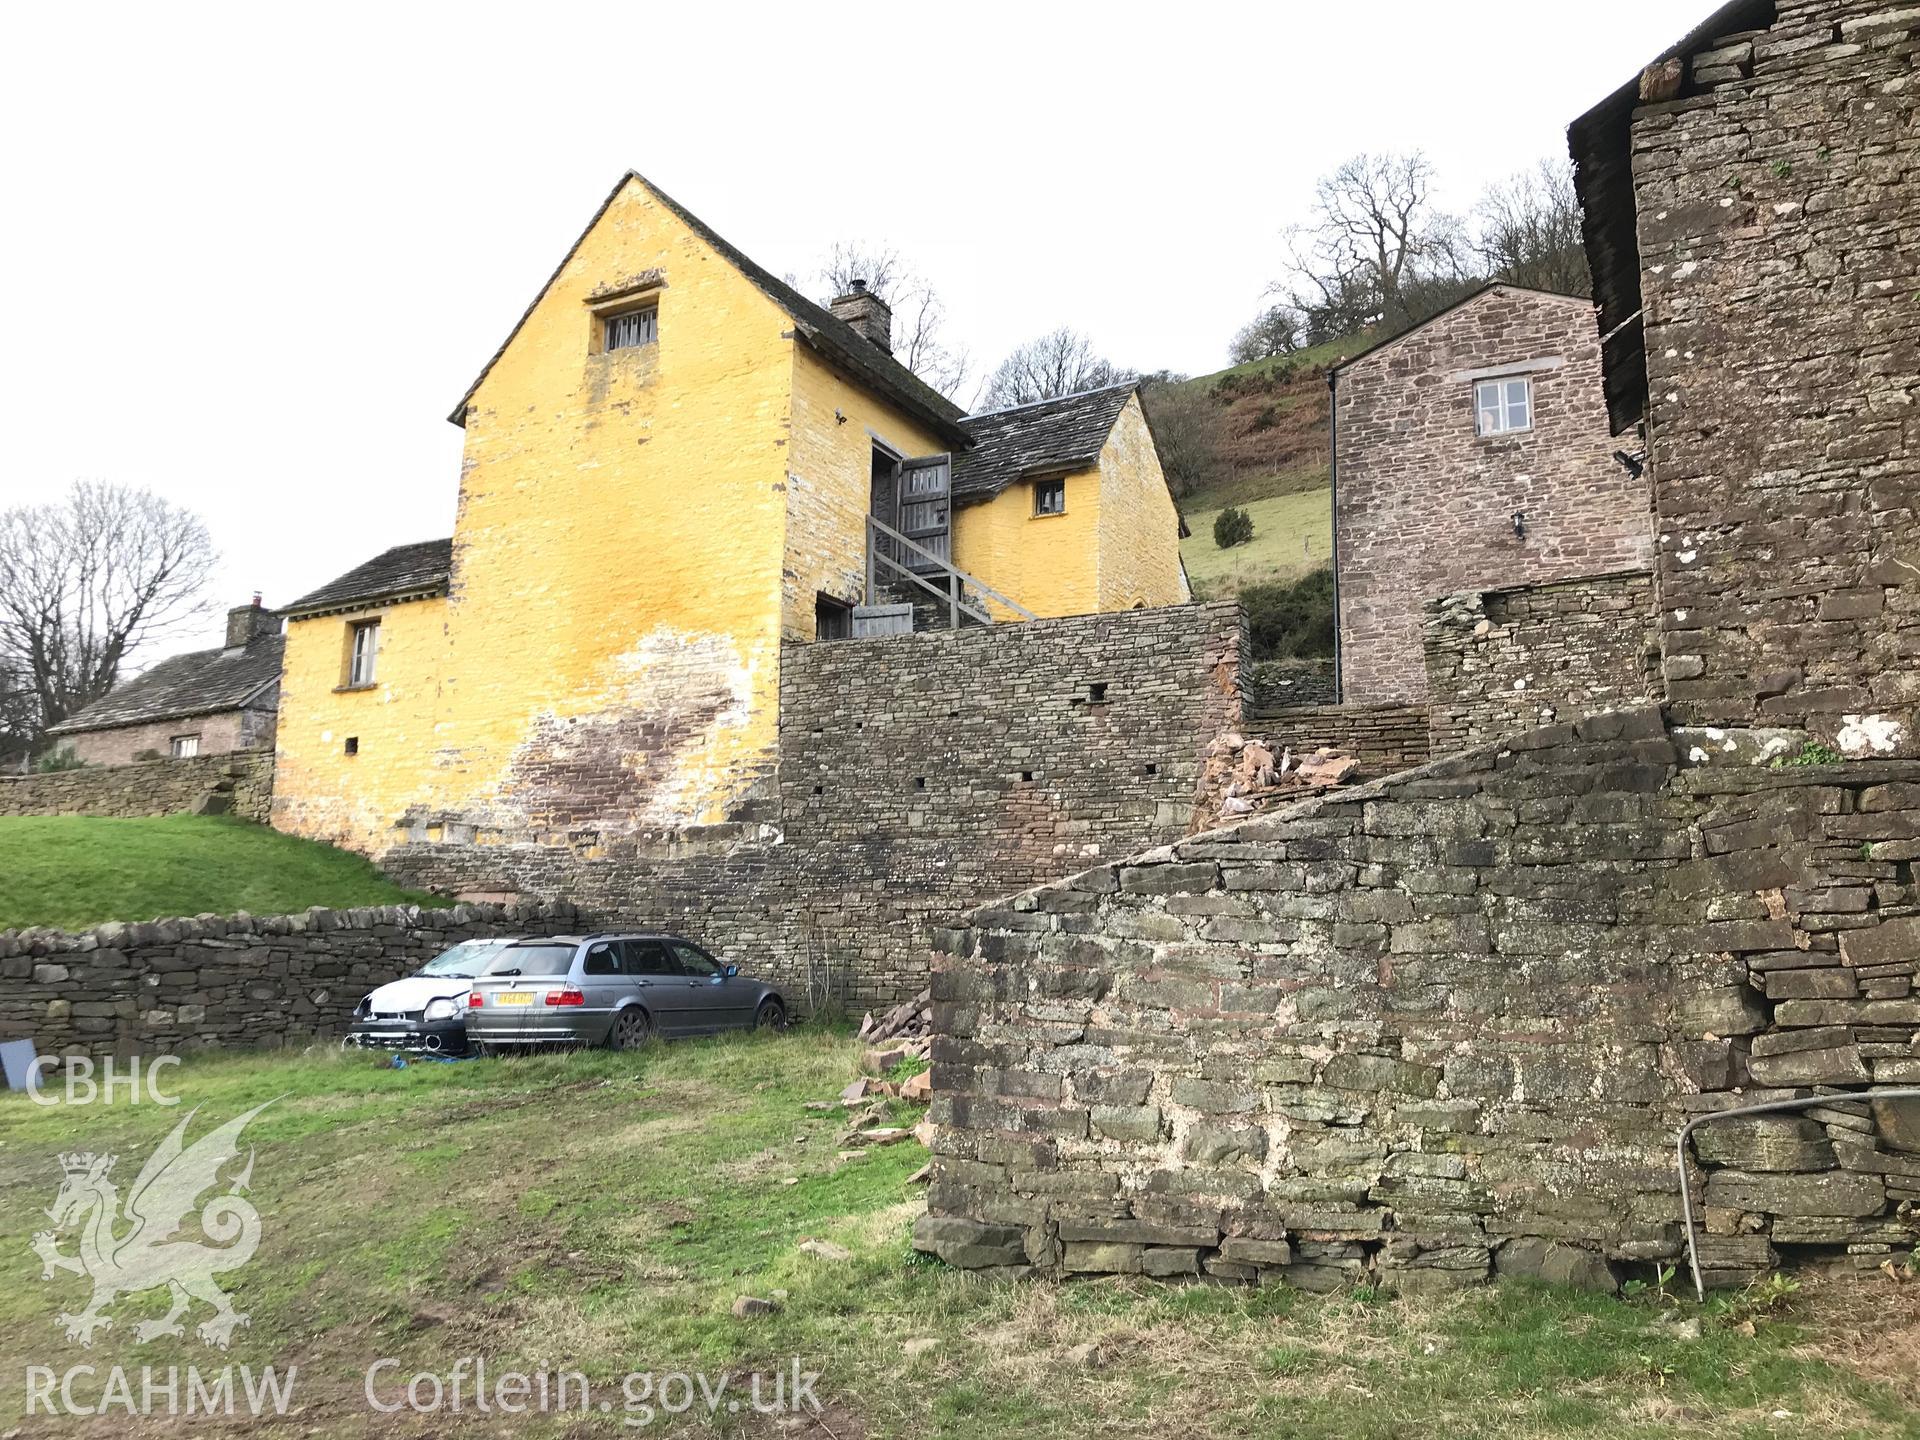 Exterior view of Ty-Hwnt-y-Bwlch farmhouse and outbuildings, Crucorney. Colour photograph taken by Paul R. Davis on 1st January 2019.